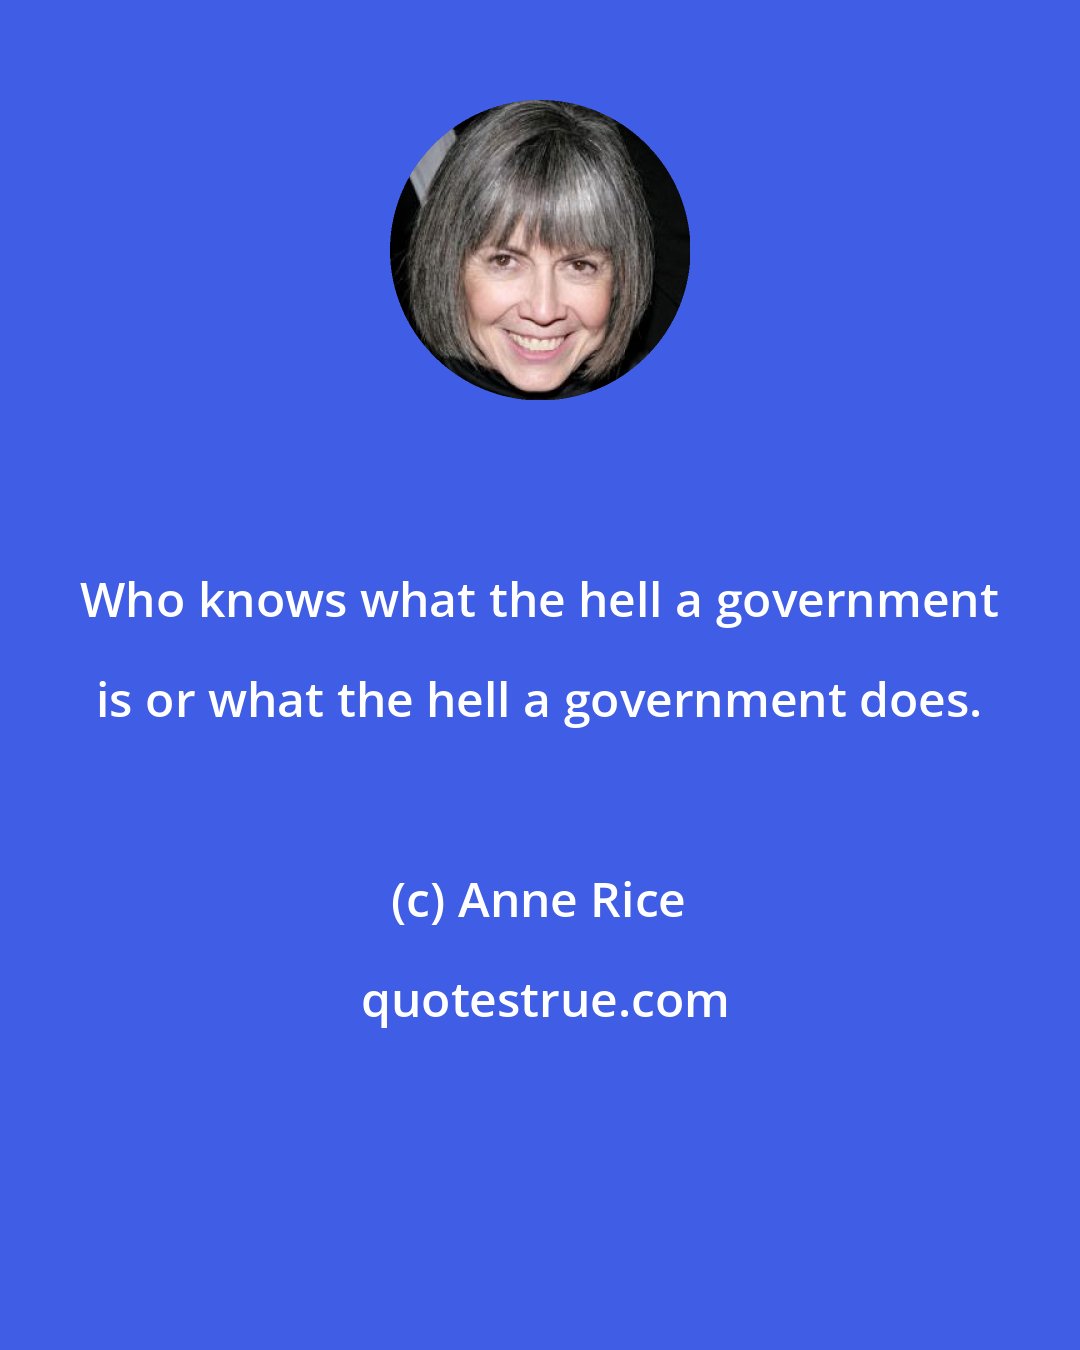 Anne Rice: Who knows what the hell a government is or what the hell a government does.